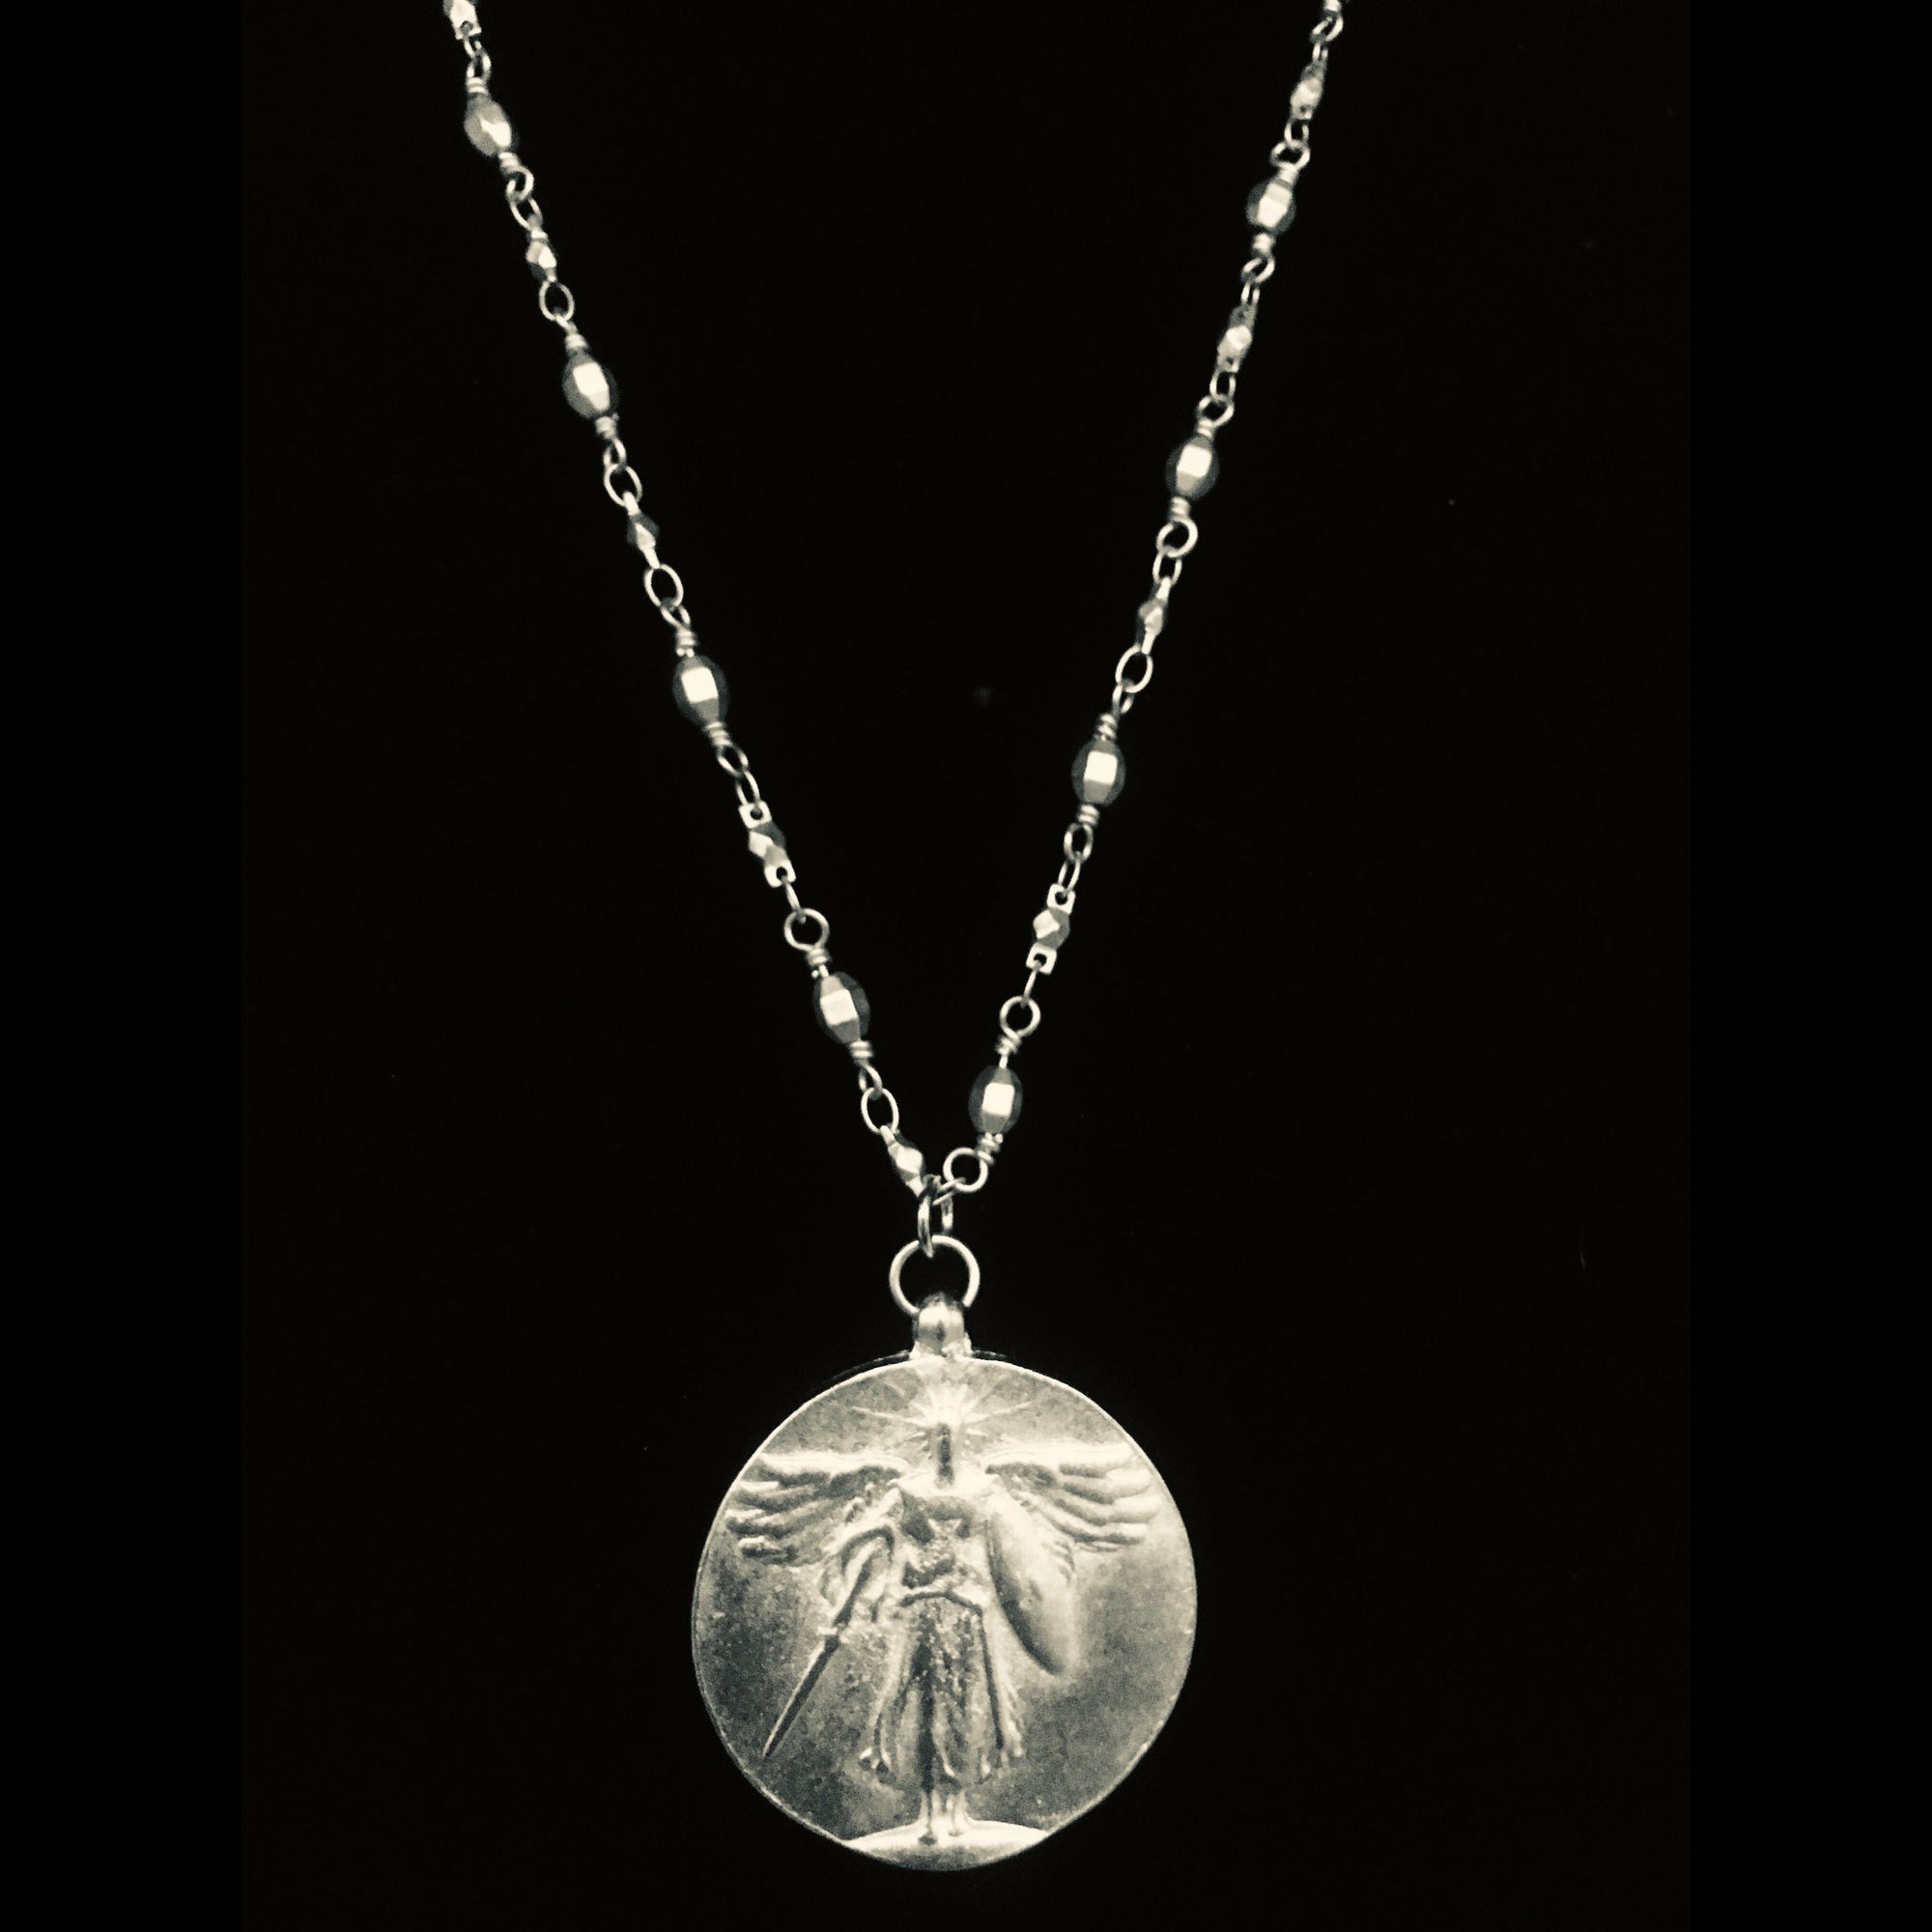 St. Michael Victory Medallion Chain Necklace by Whispering Goddess - Silver